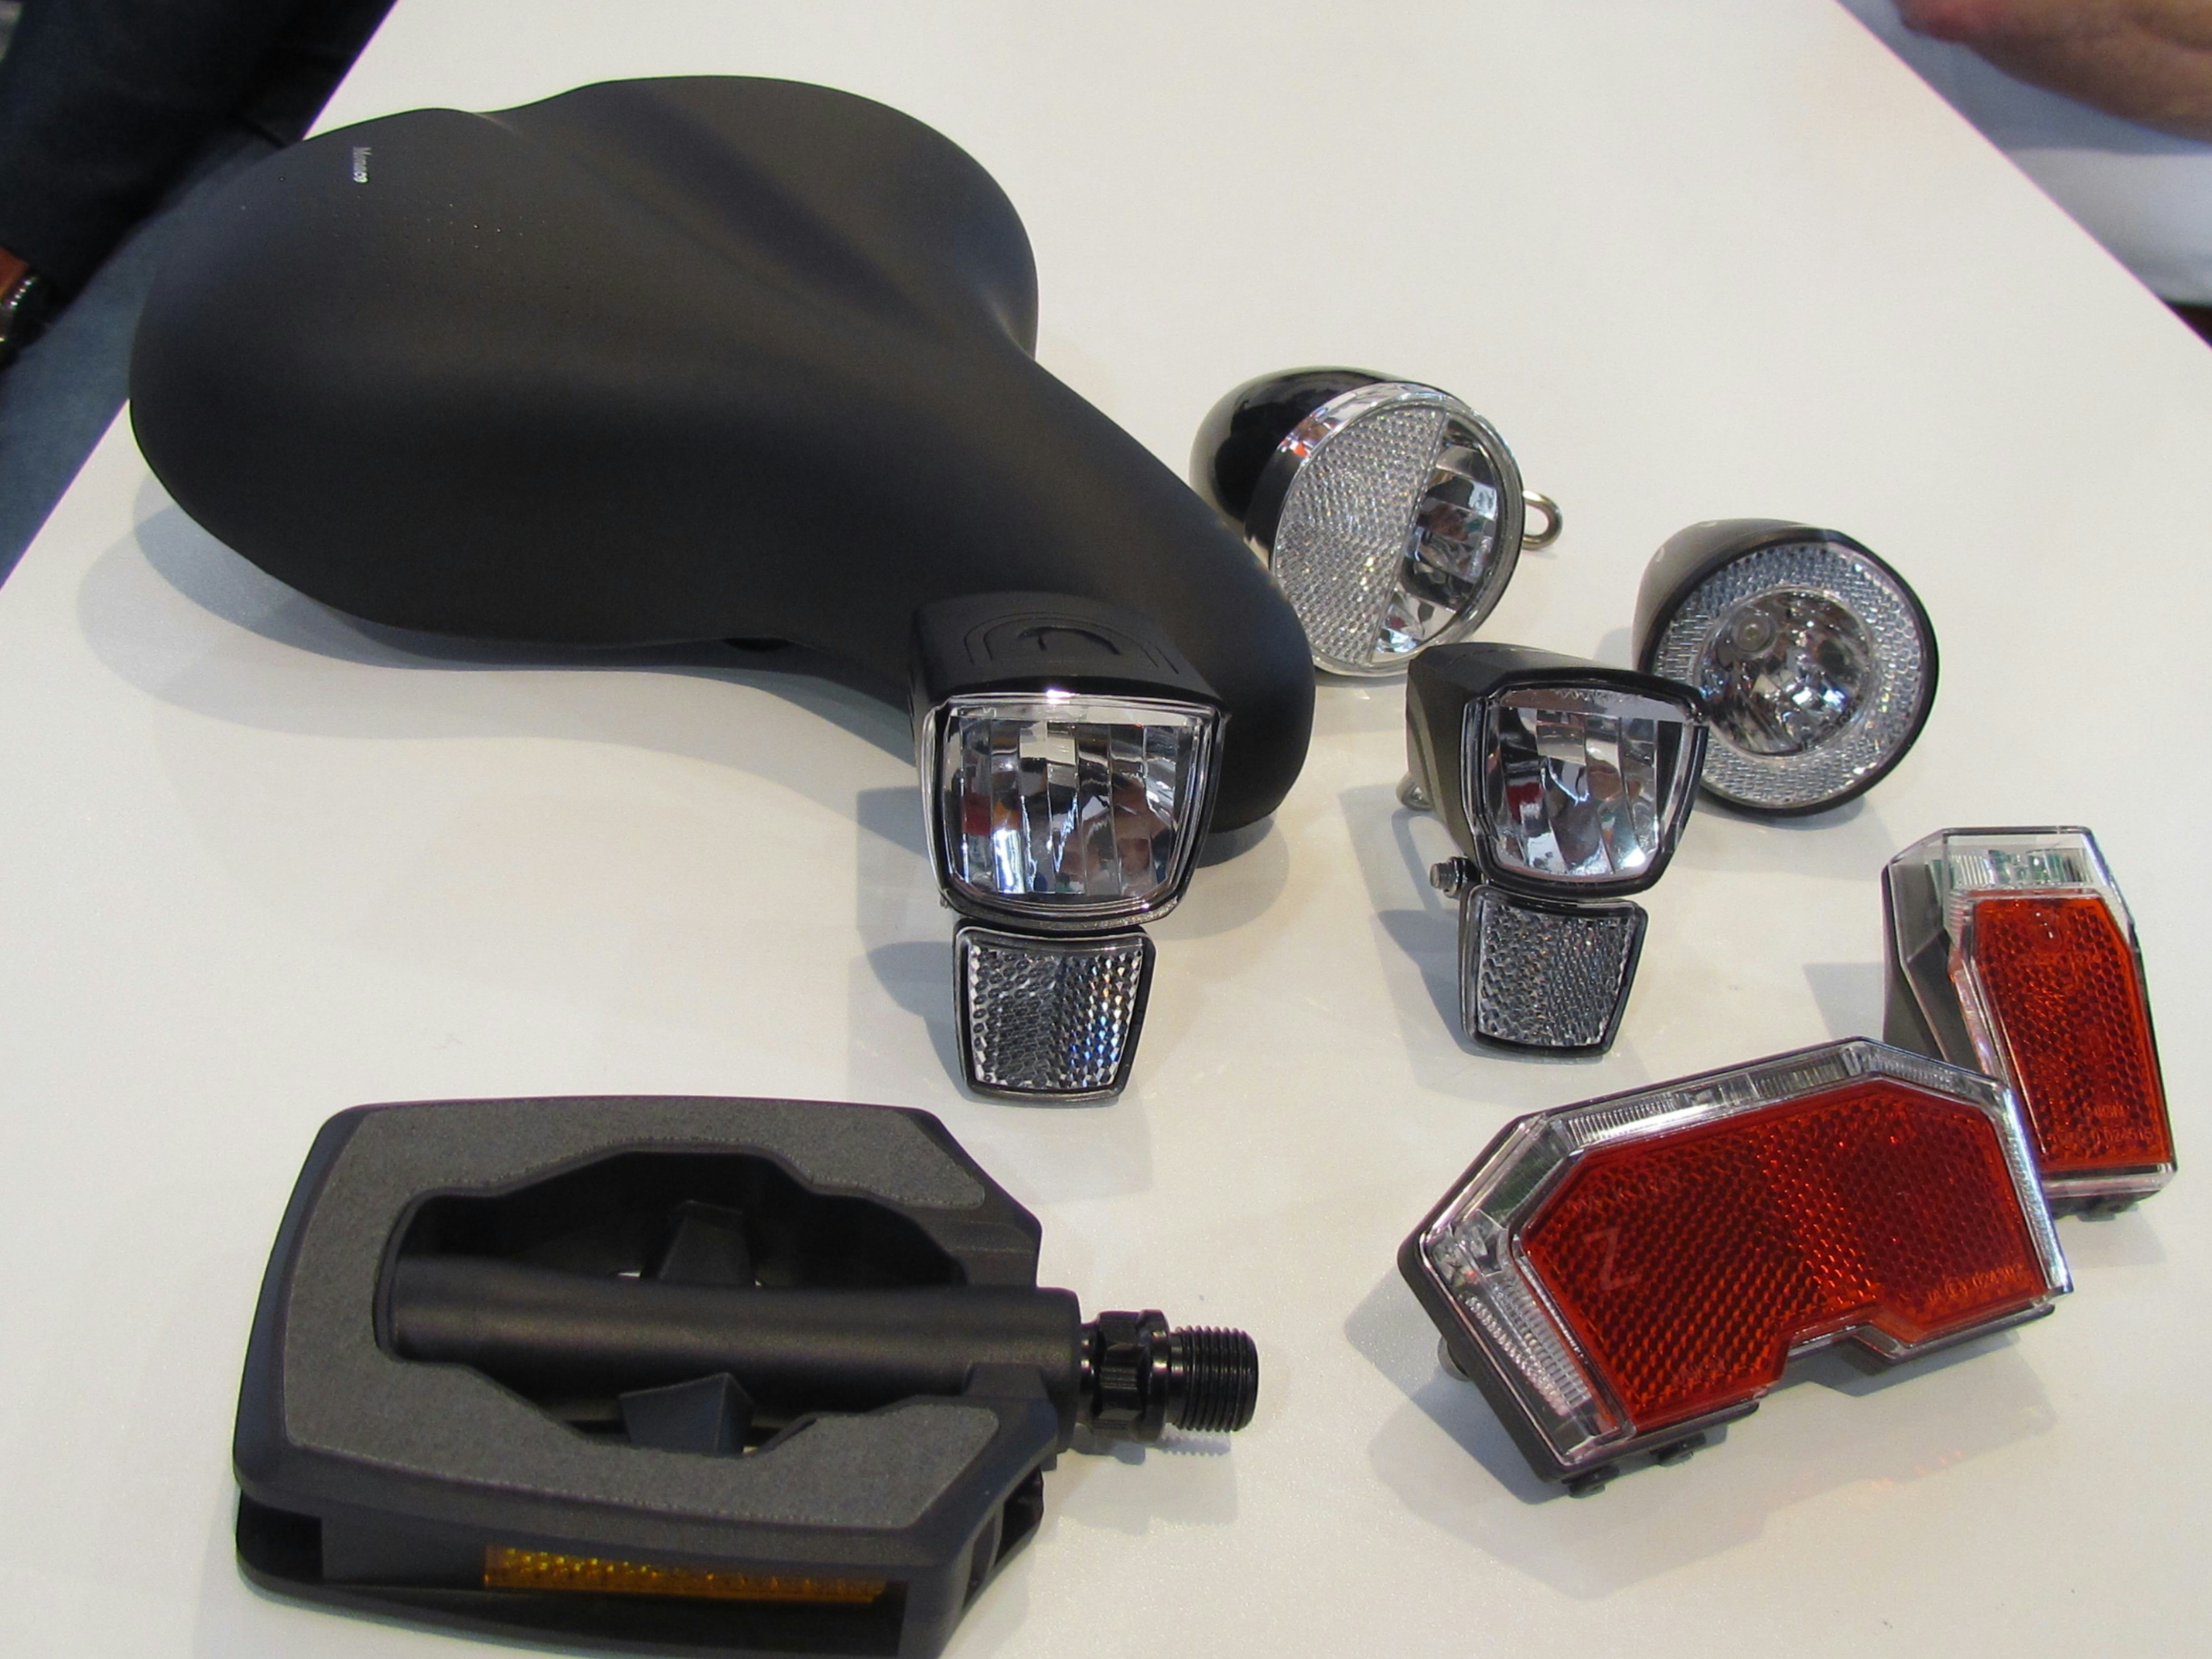 Marwi (Union) components for various e-bike categories includes saddles, pedals and lights. – Photo Bike Europe